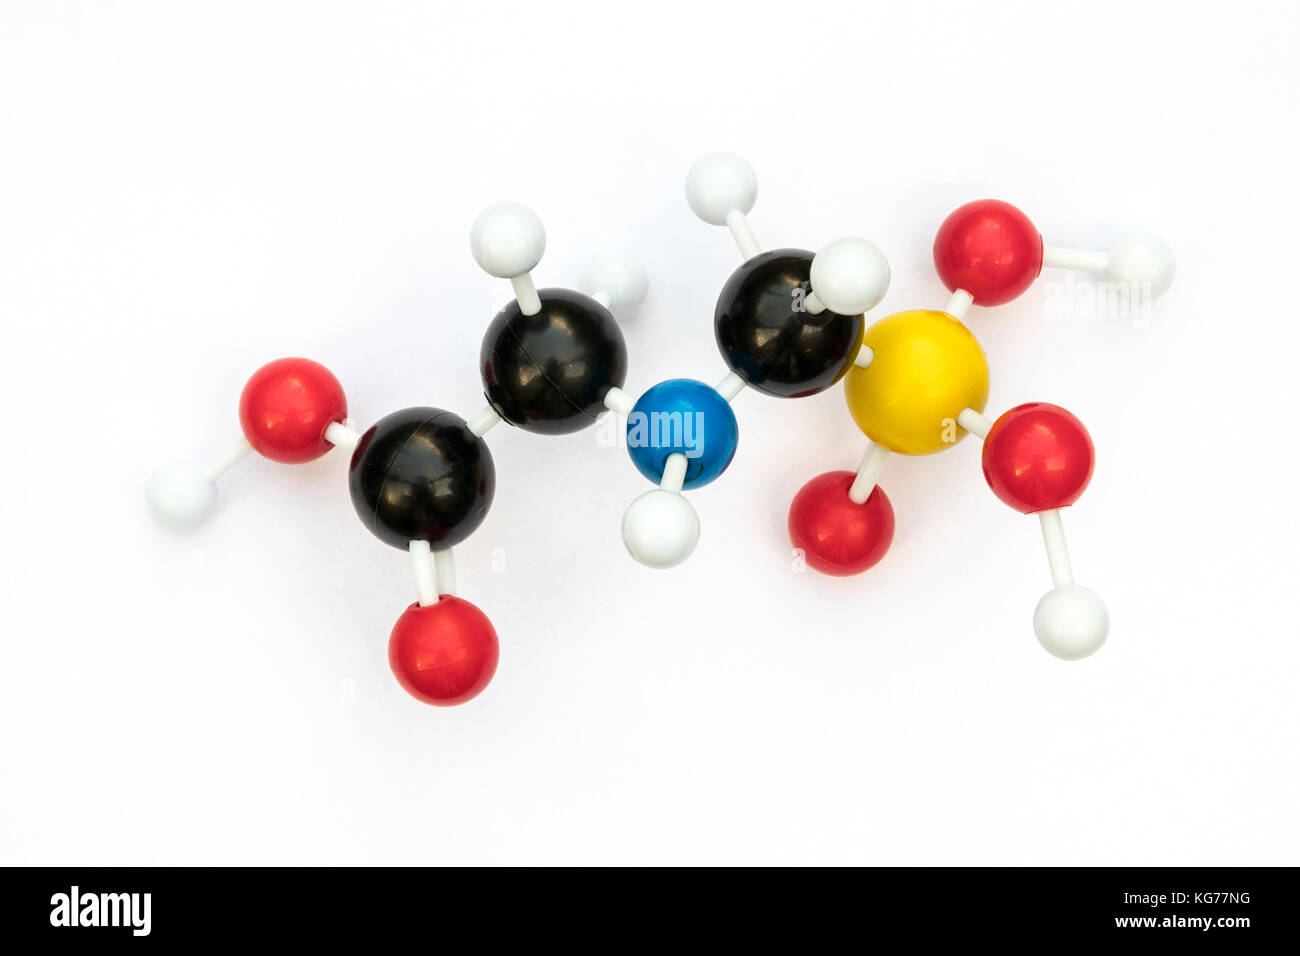 Plastic ball-and-stick model of the systemic herbicide glyphosate (chemical formula: C3H8NO5P) on a white background. Stock Photo